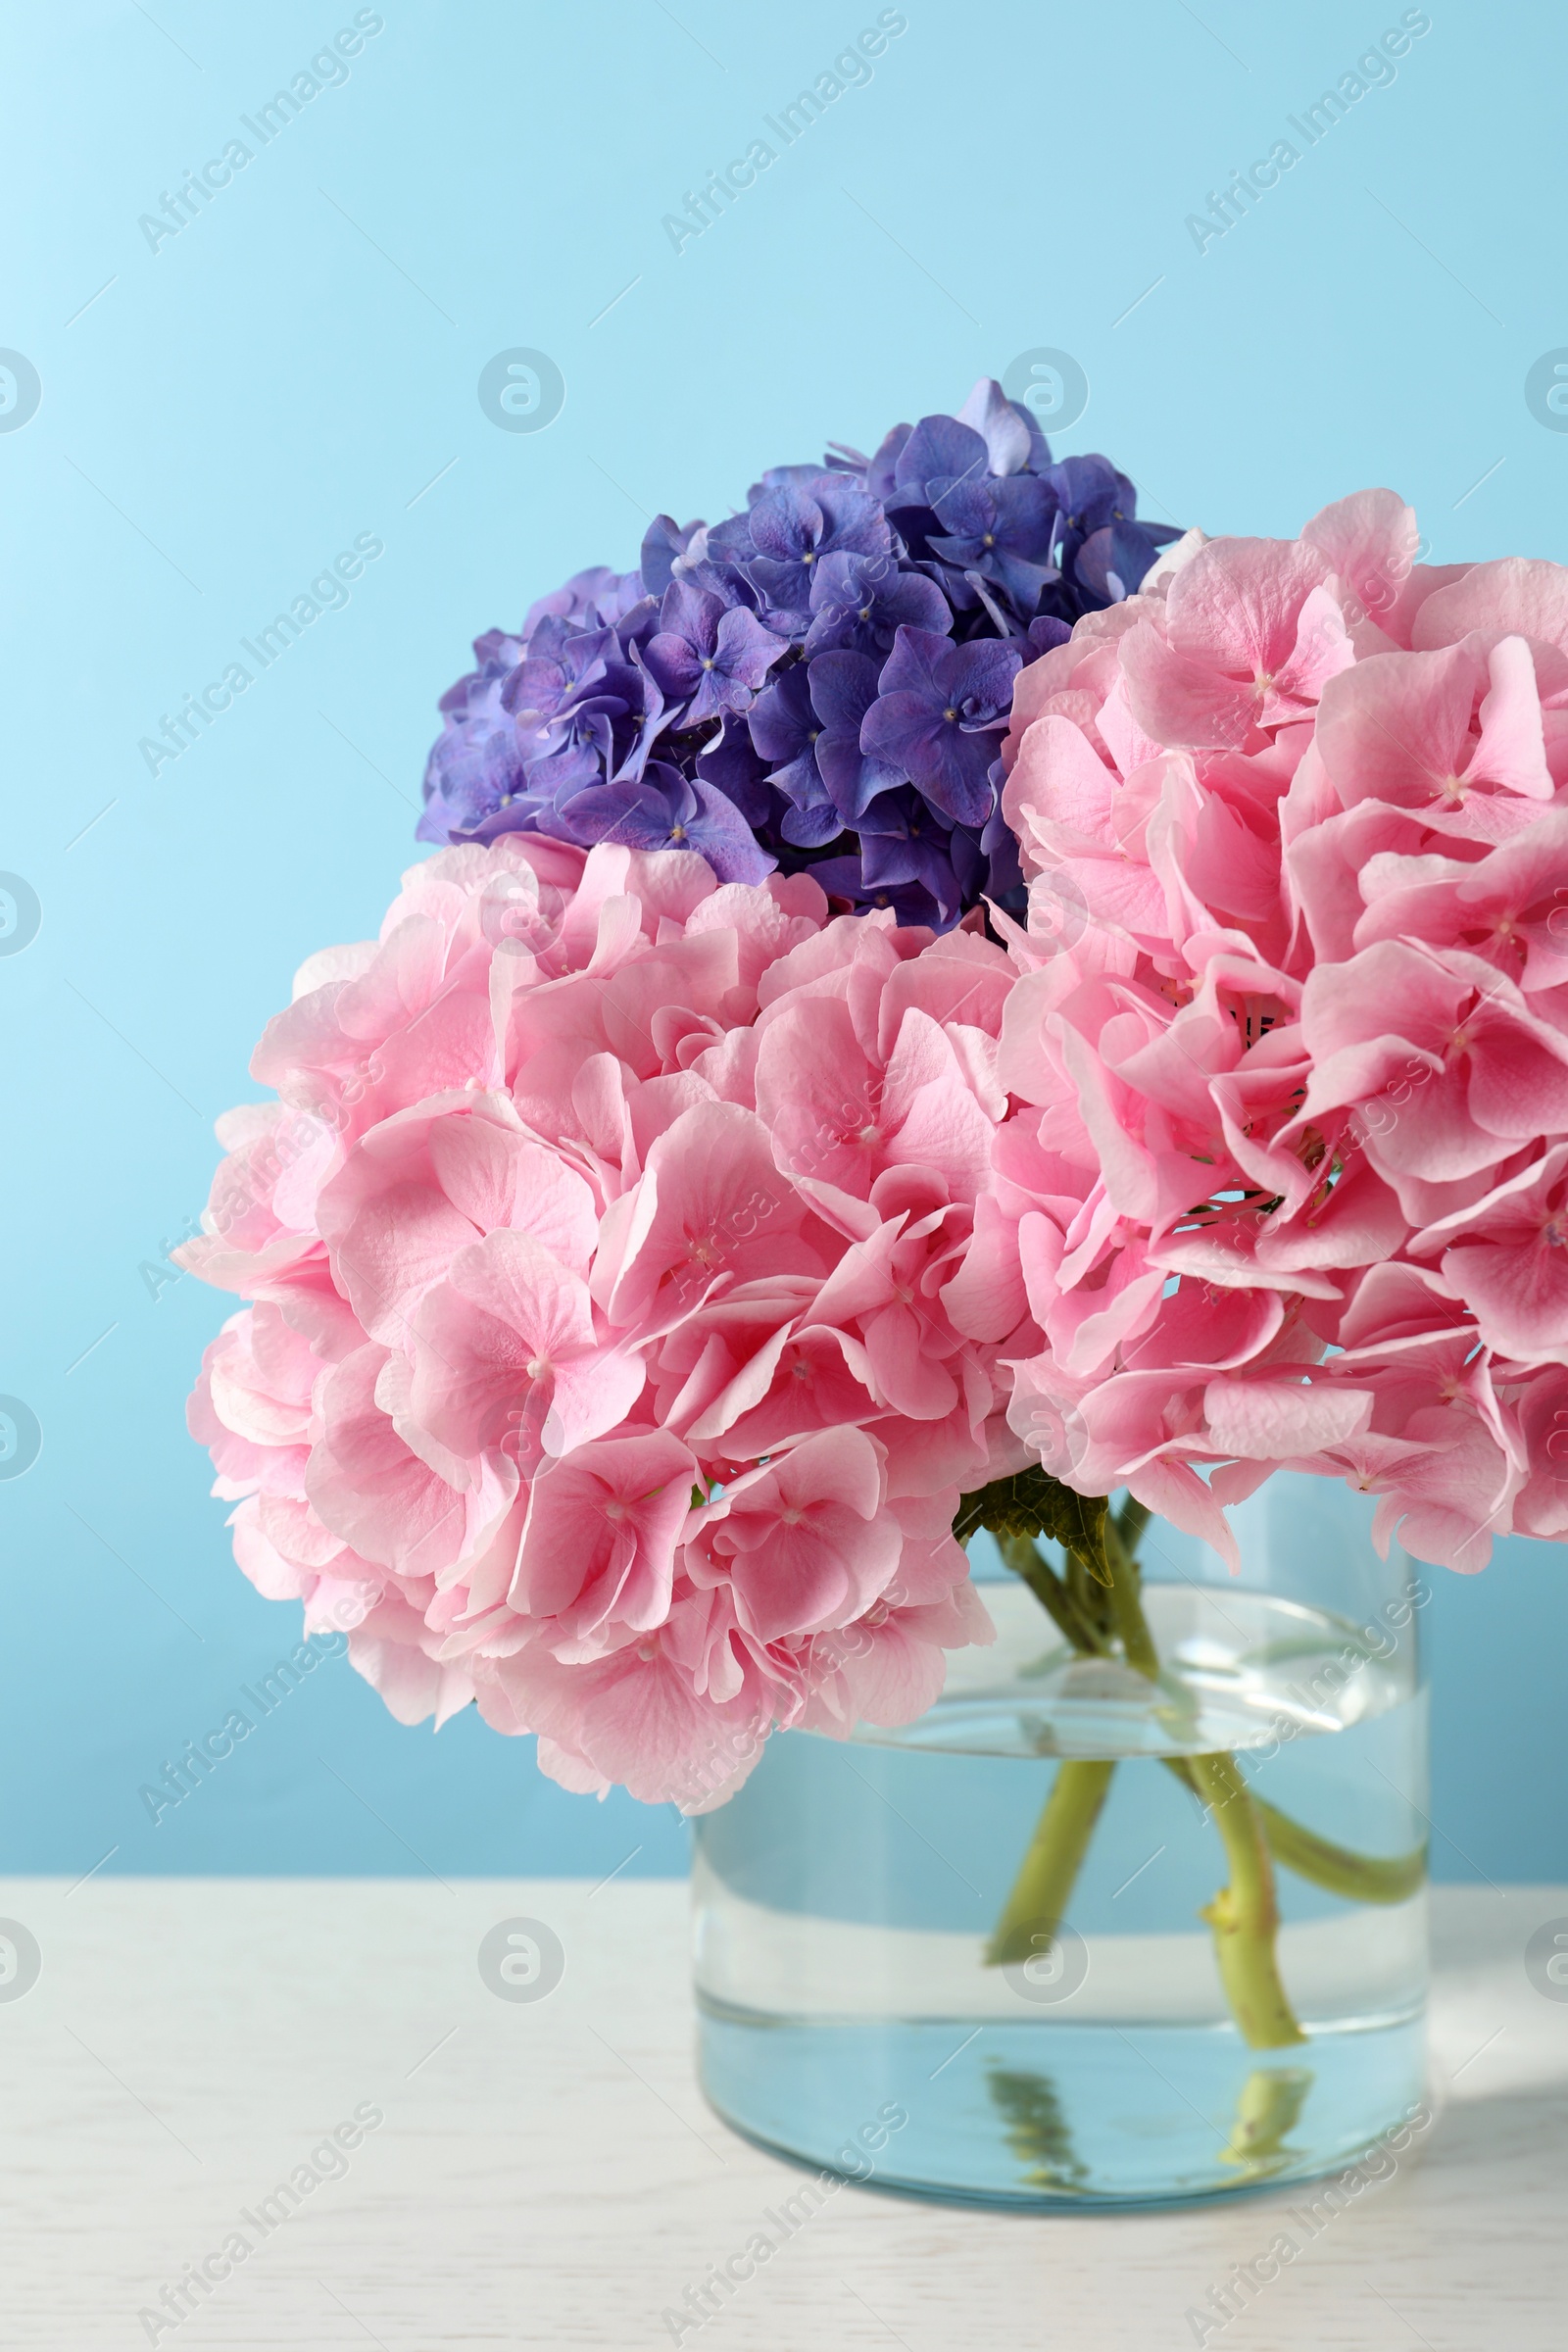 Photo of Vase with beautiful hortensia flowers on white table against light blue background